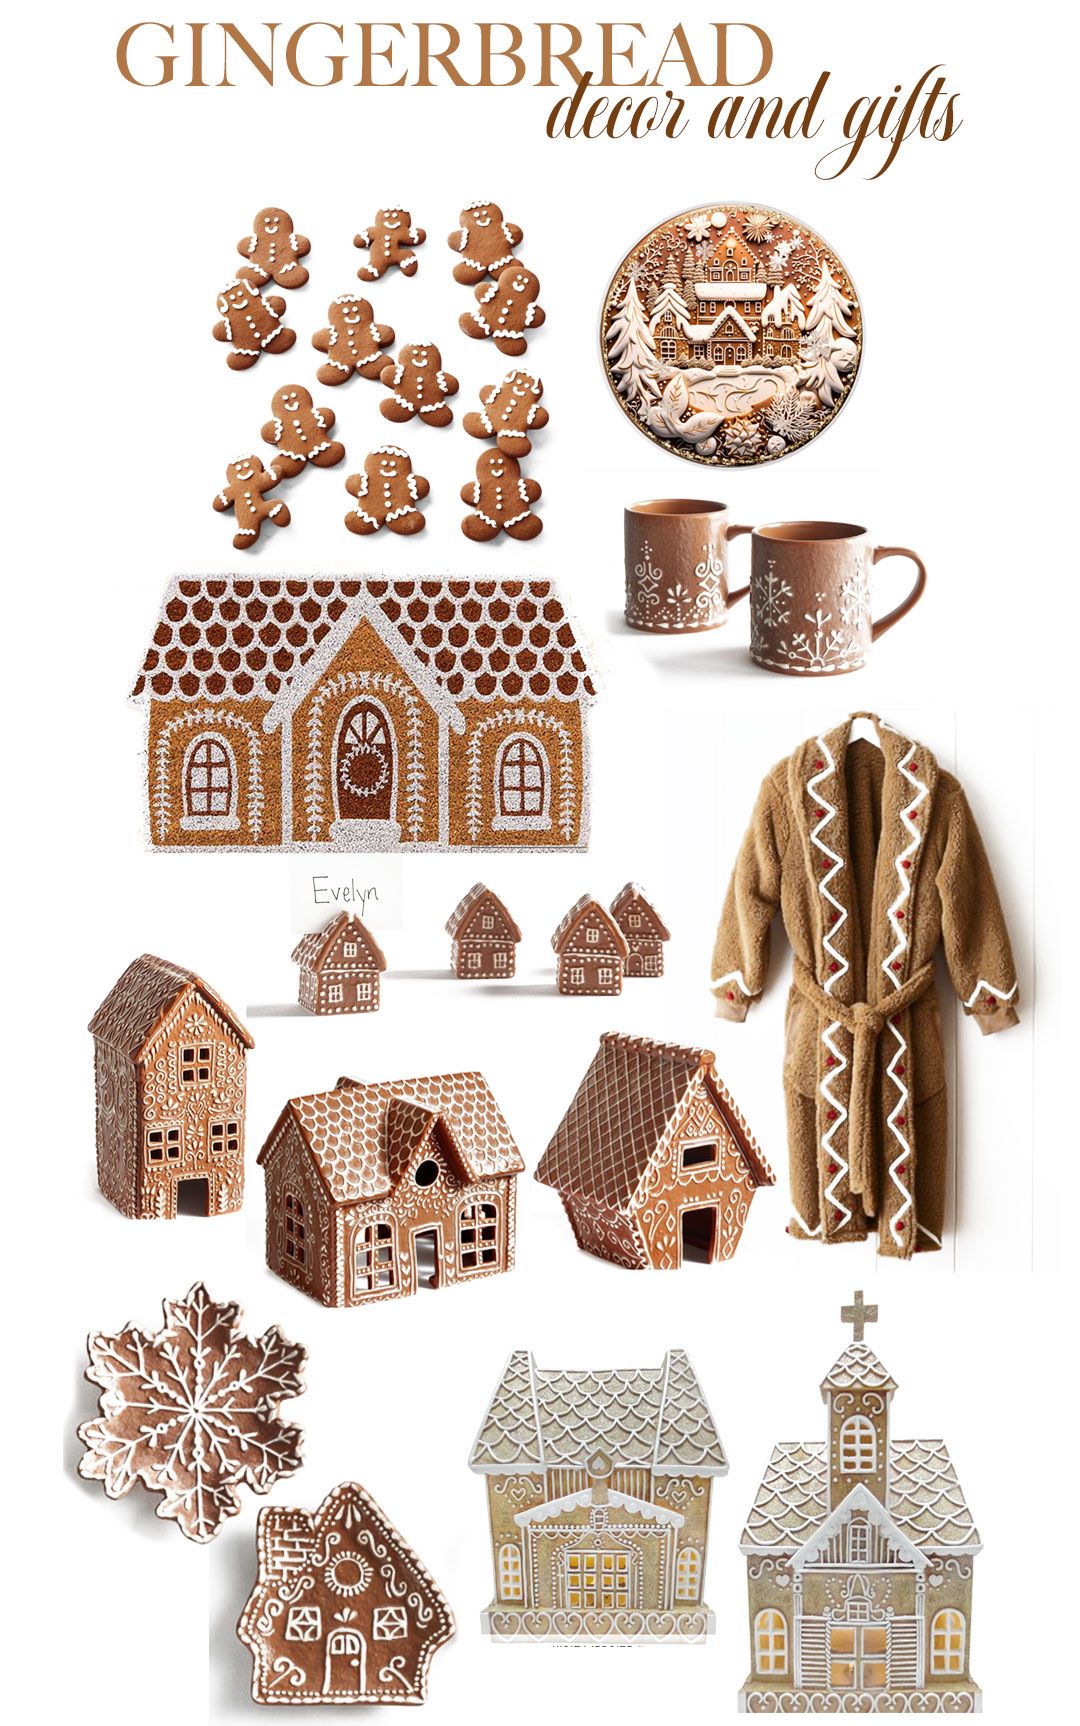 Gingerbread Decor and Gifts